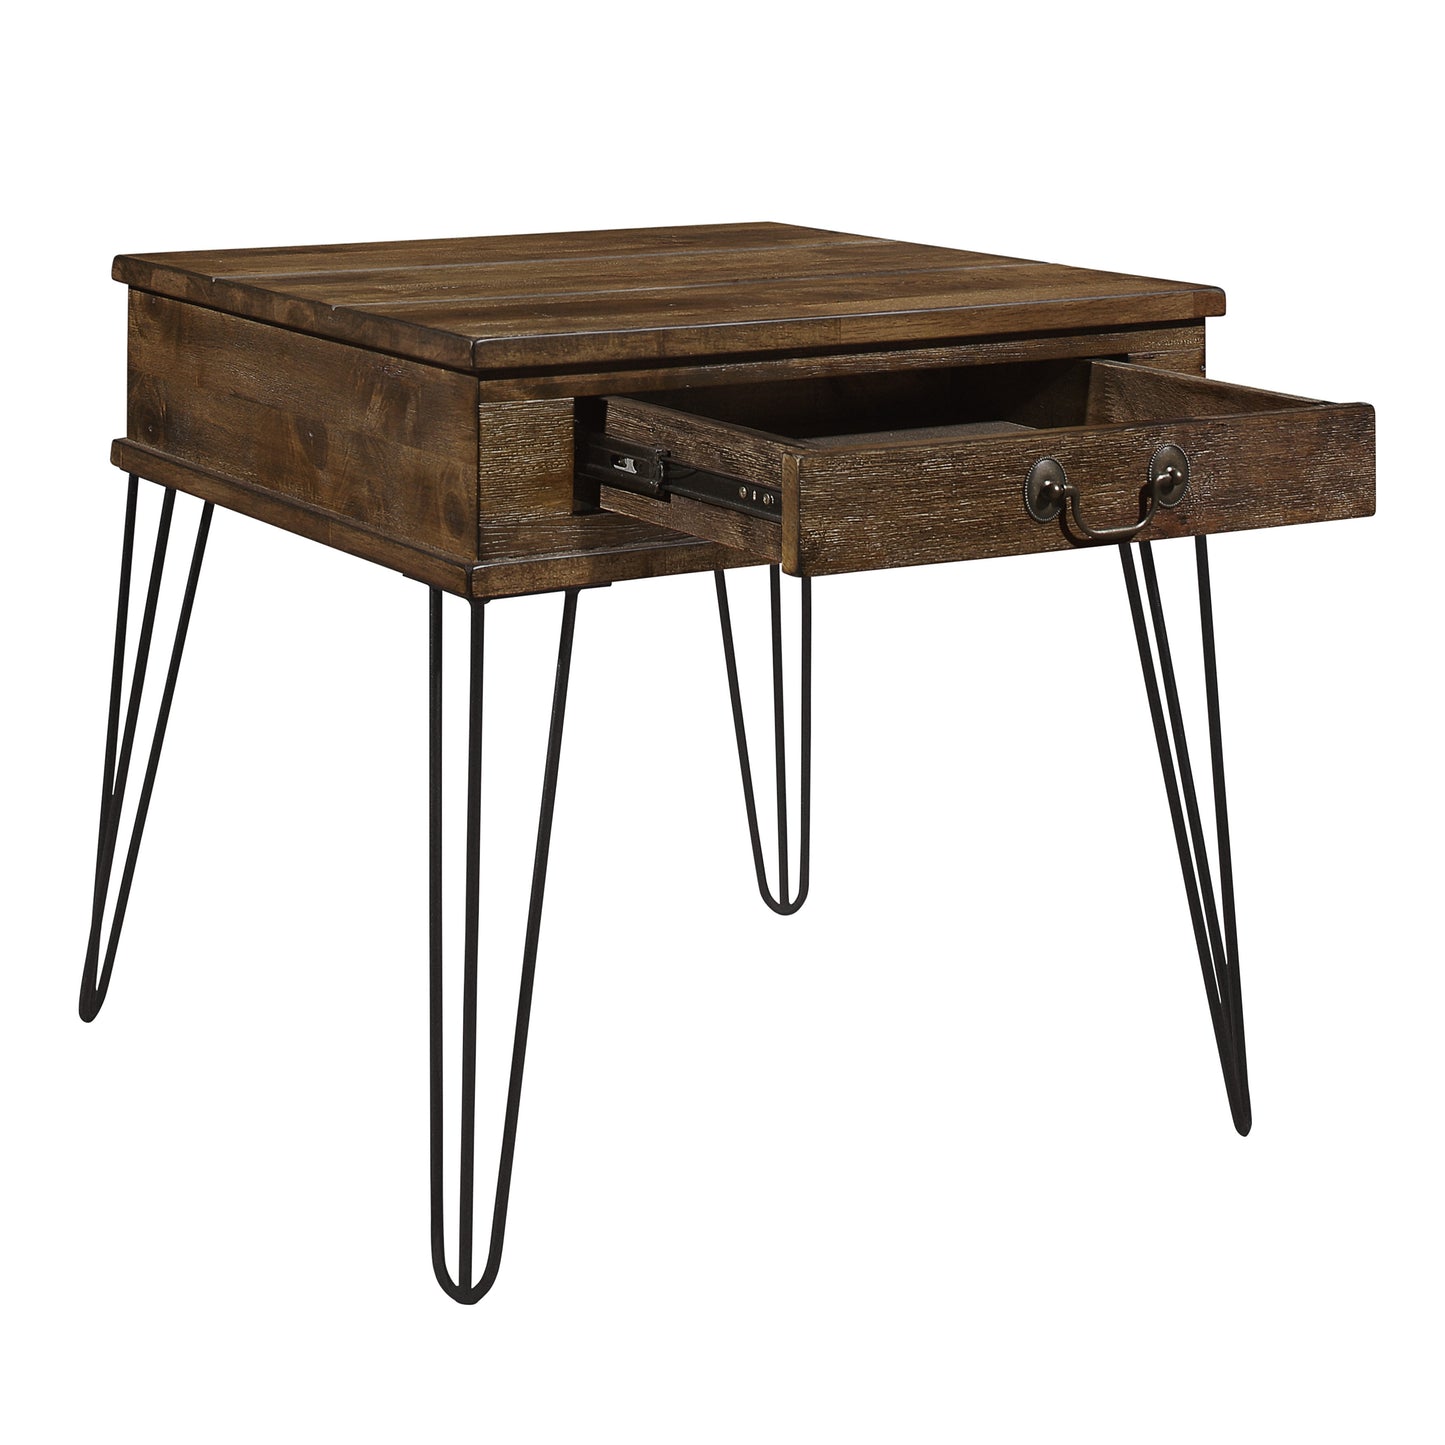 Shaffner Coffee Table RUSTIC OAK ONLY